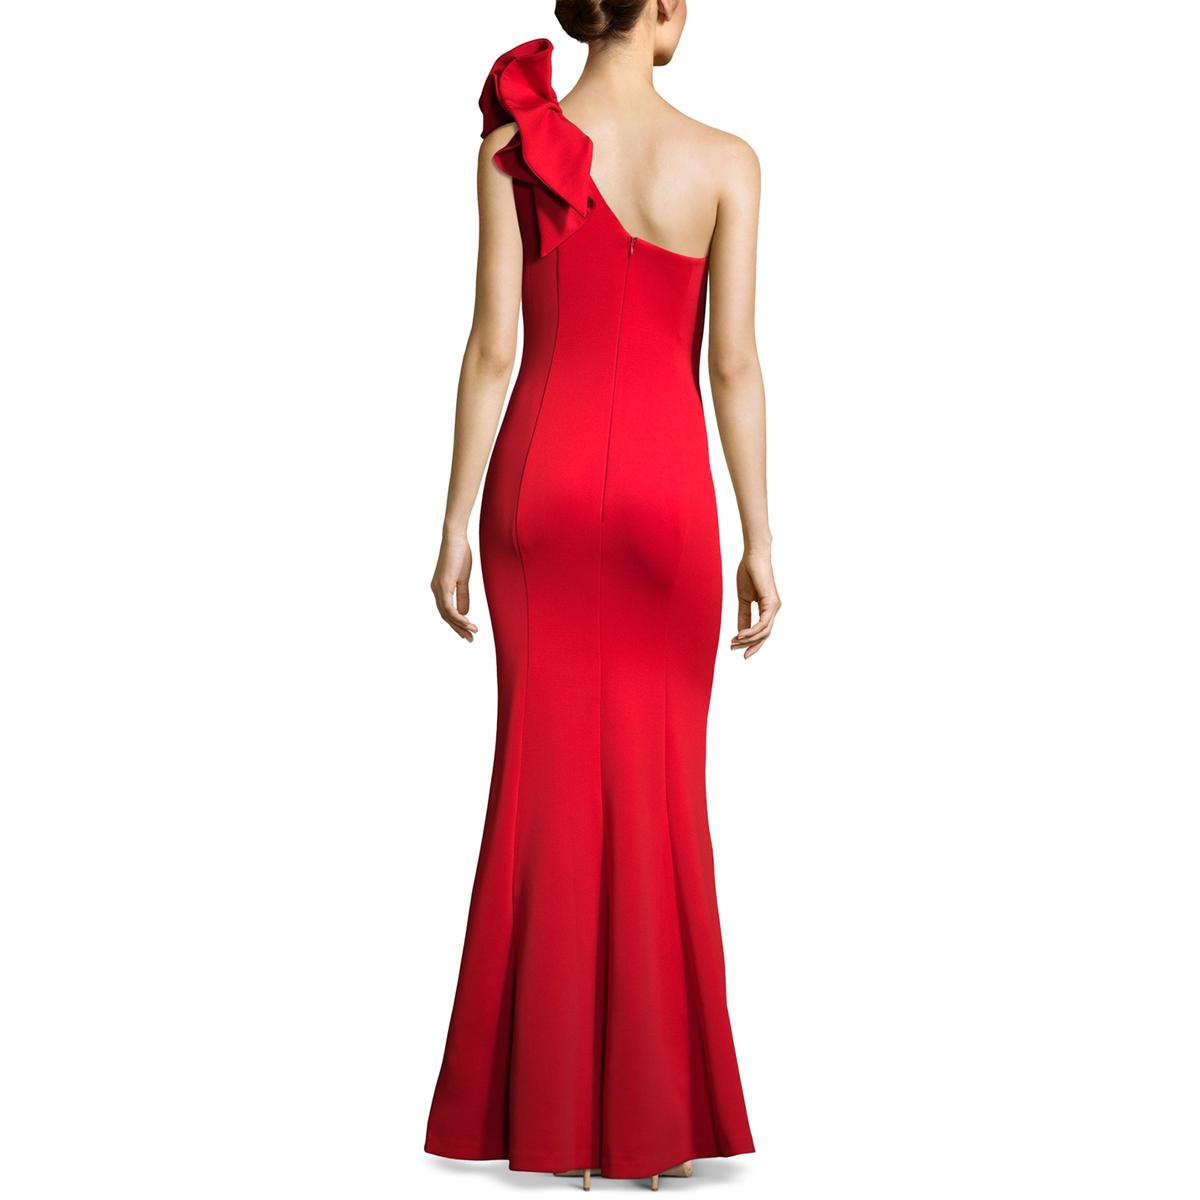 Betsy & Adam Womens Red Ruffled Formal Evening Dress Gown Petites 4P